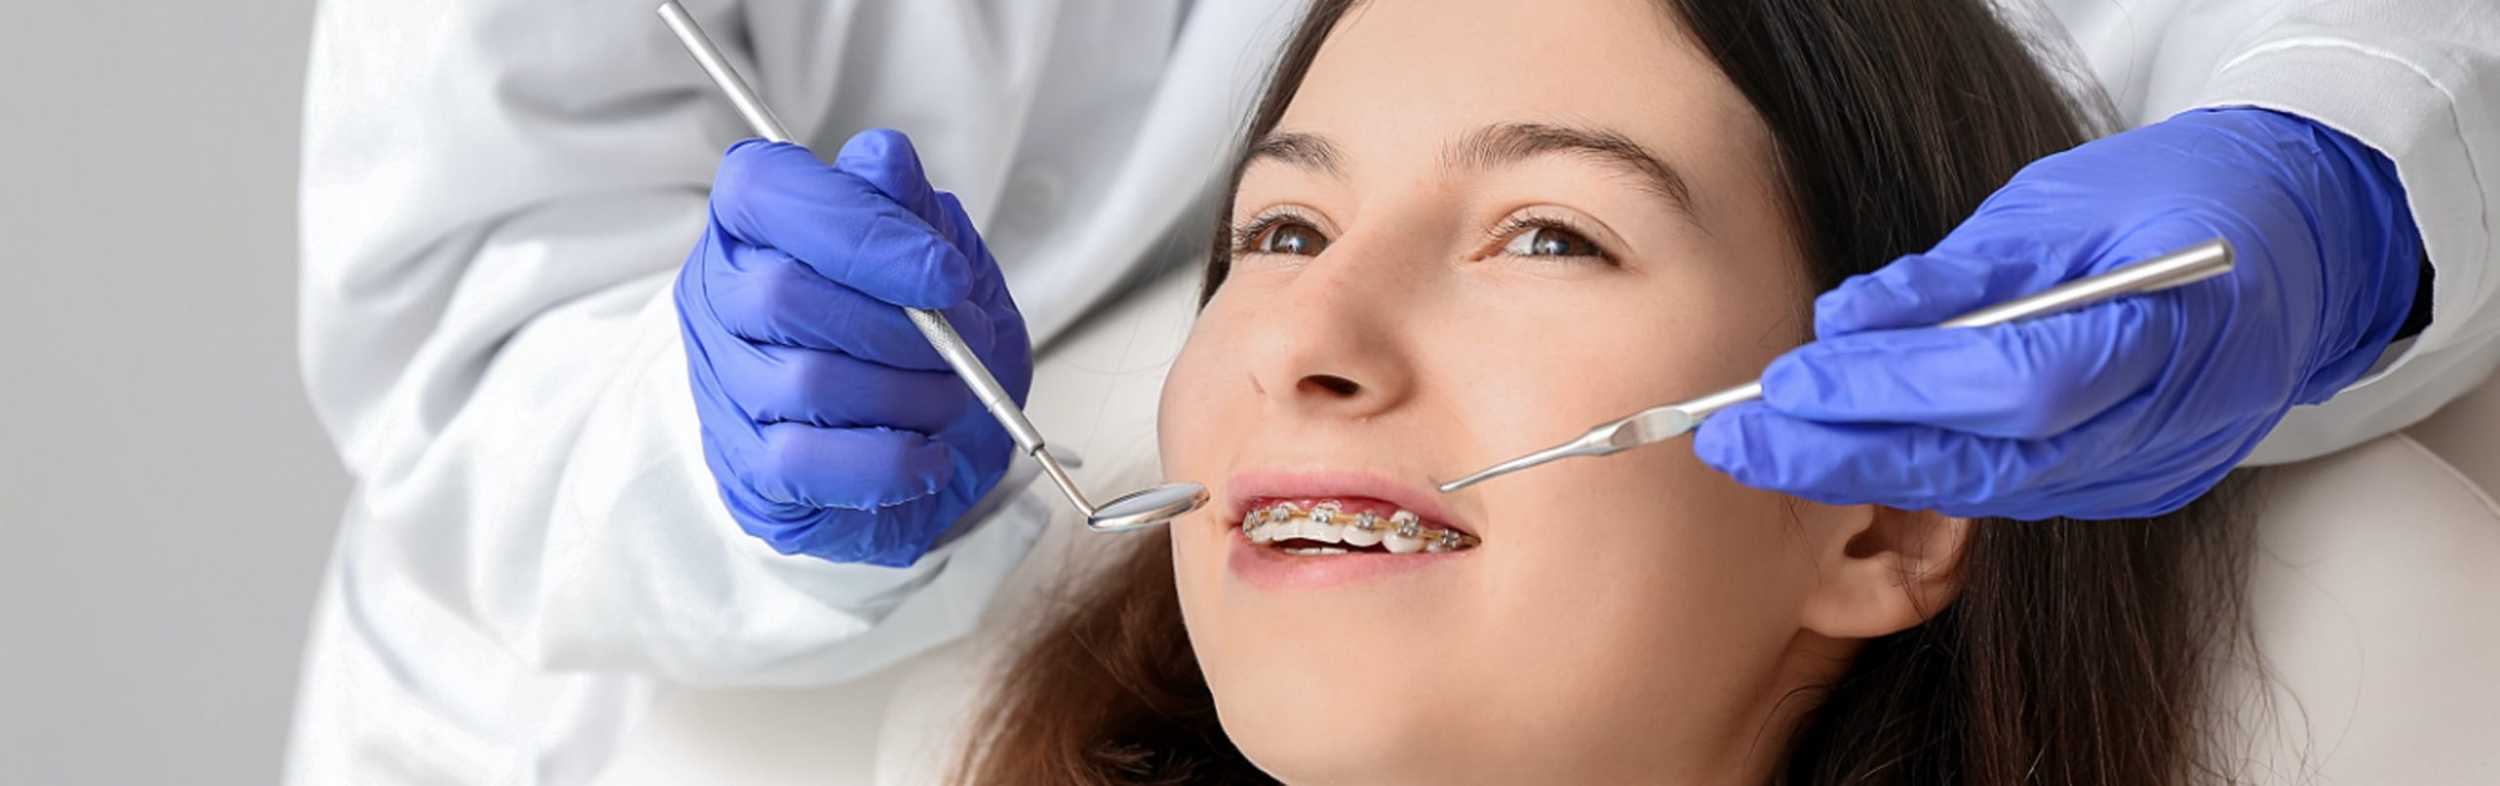 A orthodontist checking a patients mouth